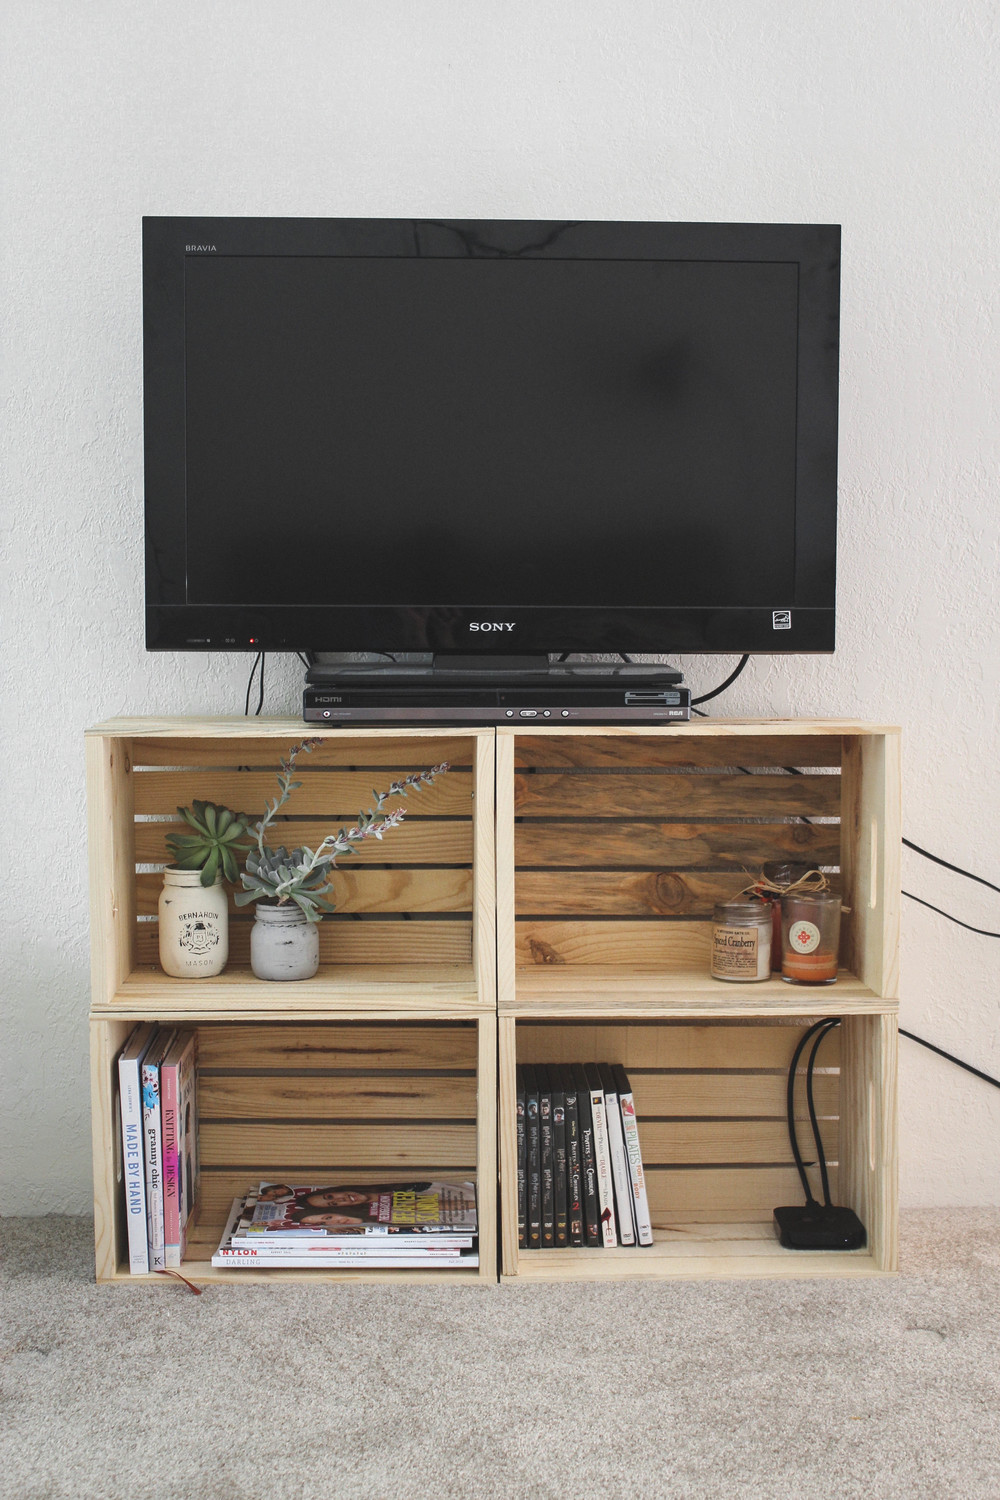 pix1 DIY TV stand ideas and examples, you could set up in your home